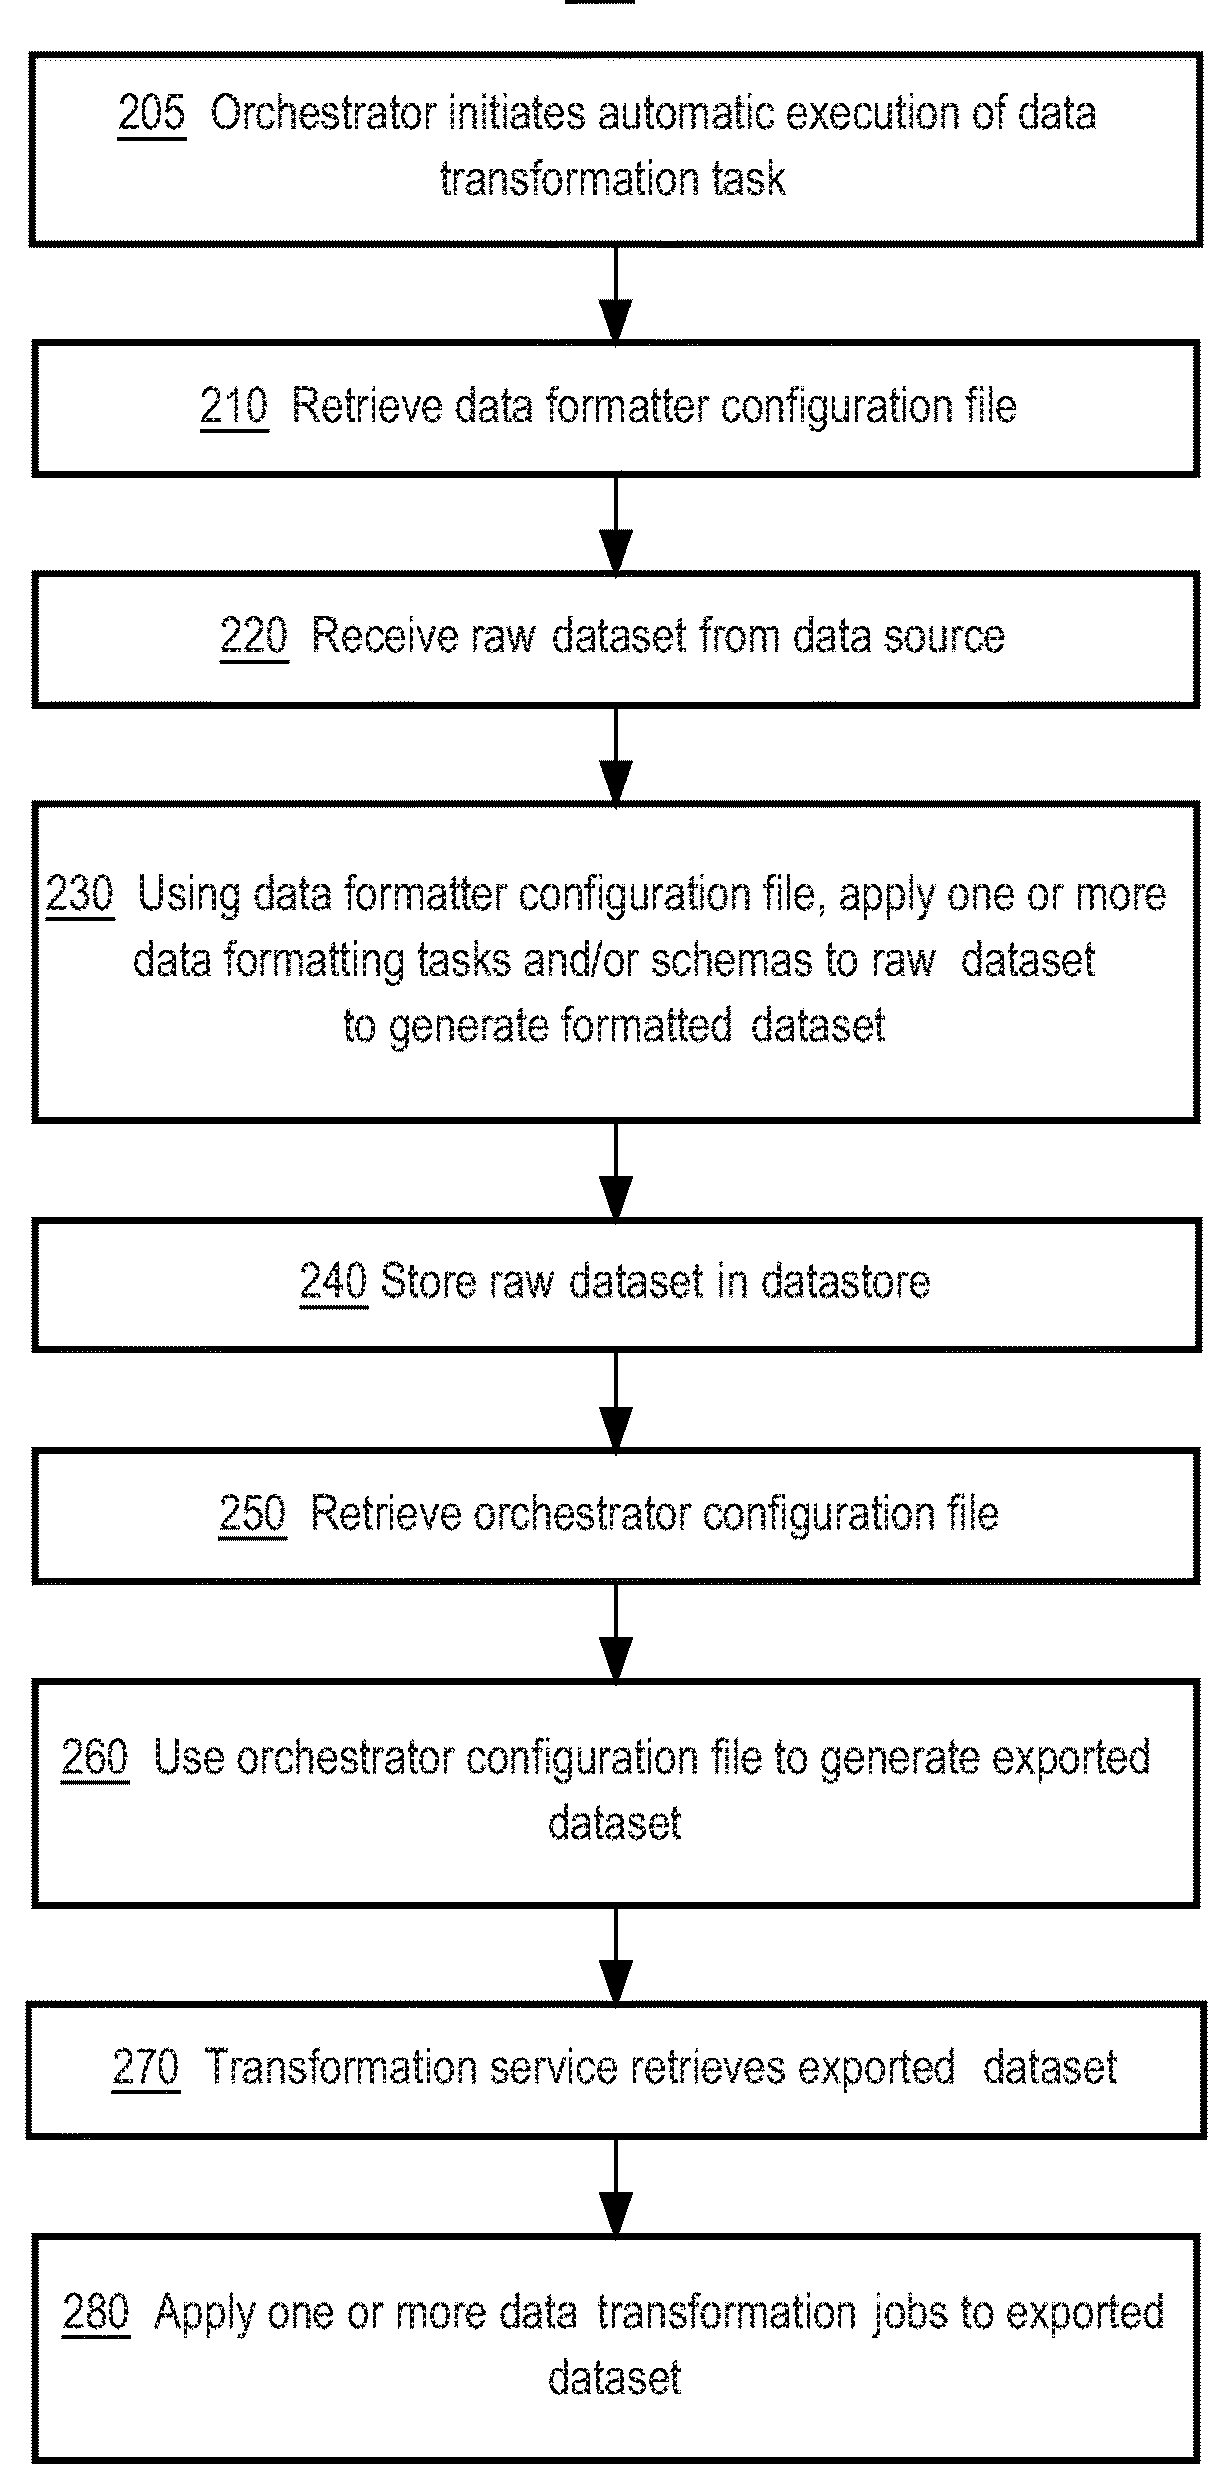 Automatically executing tasks and configuring access control lists in a data transformation system